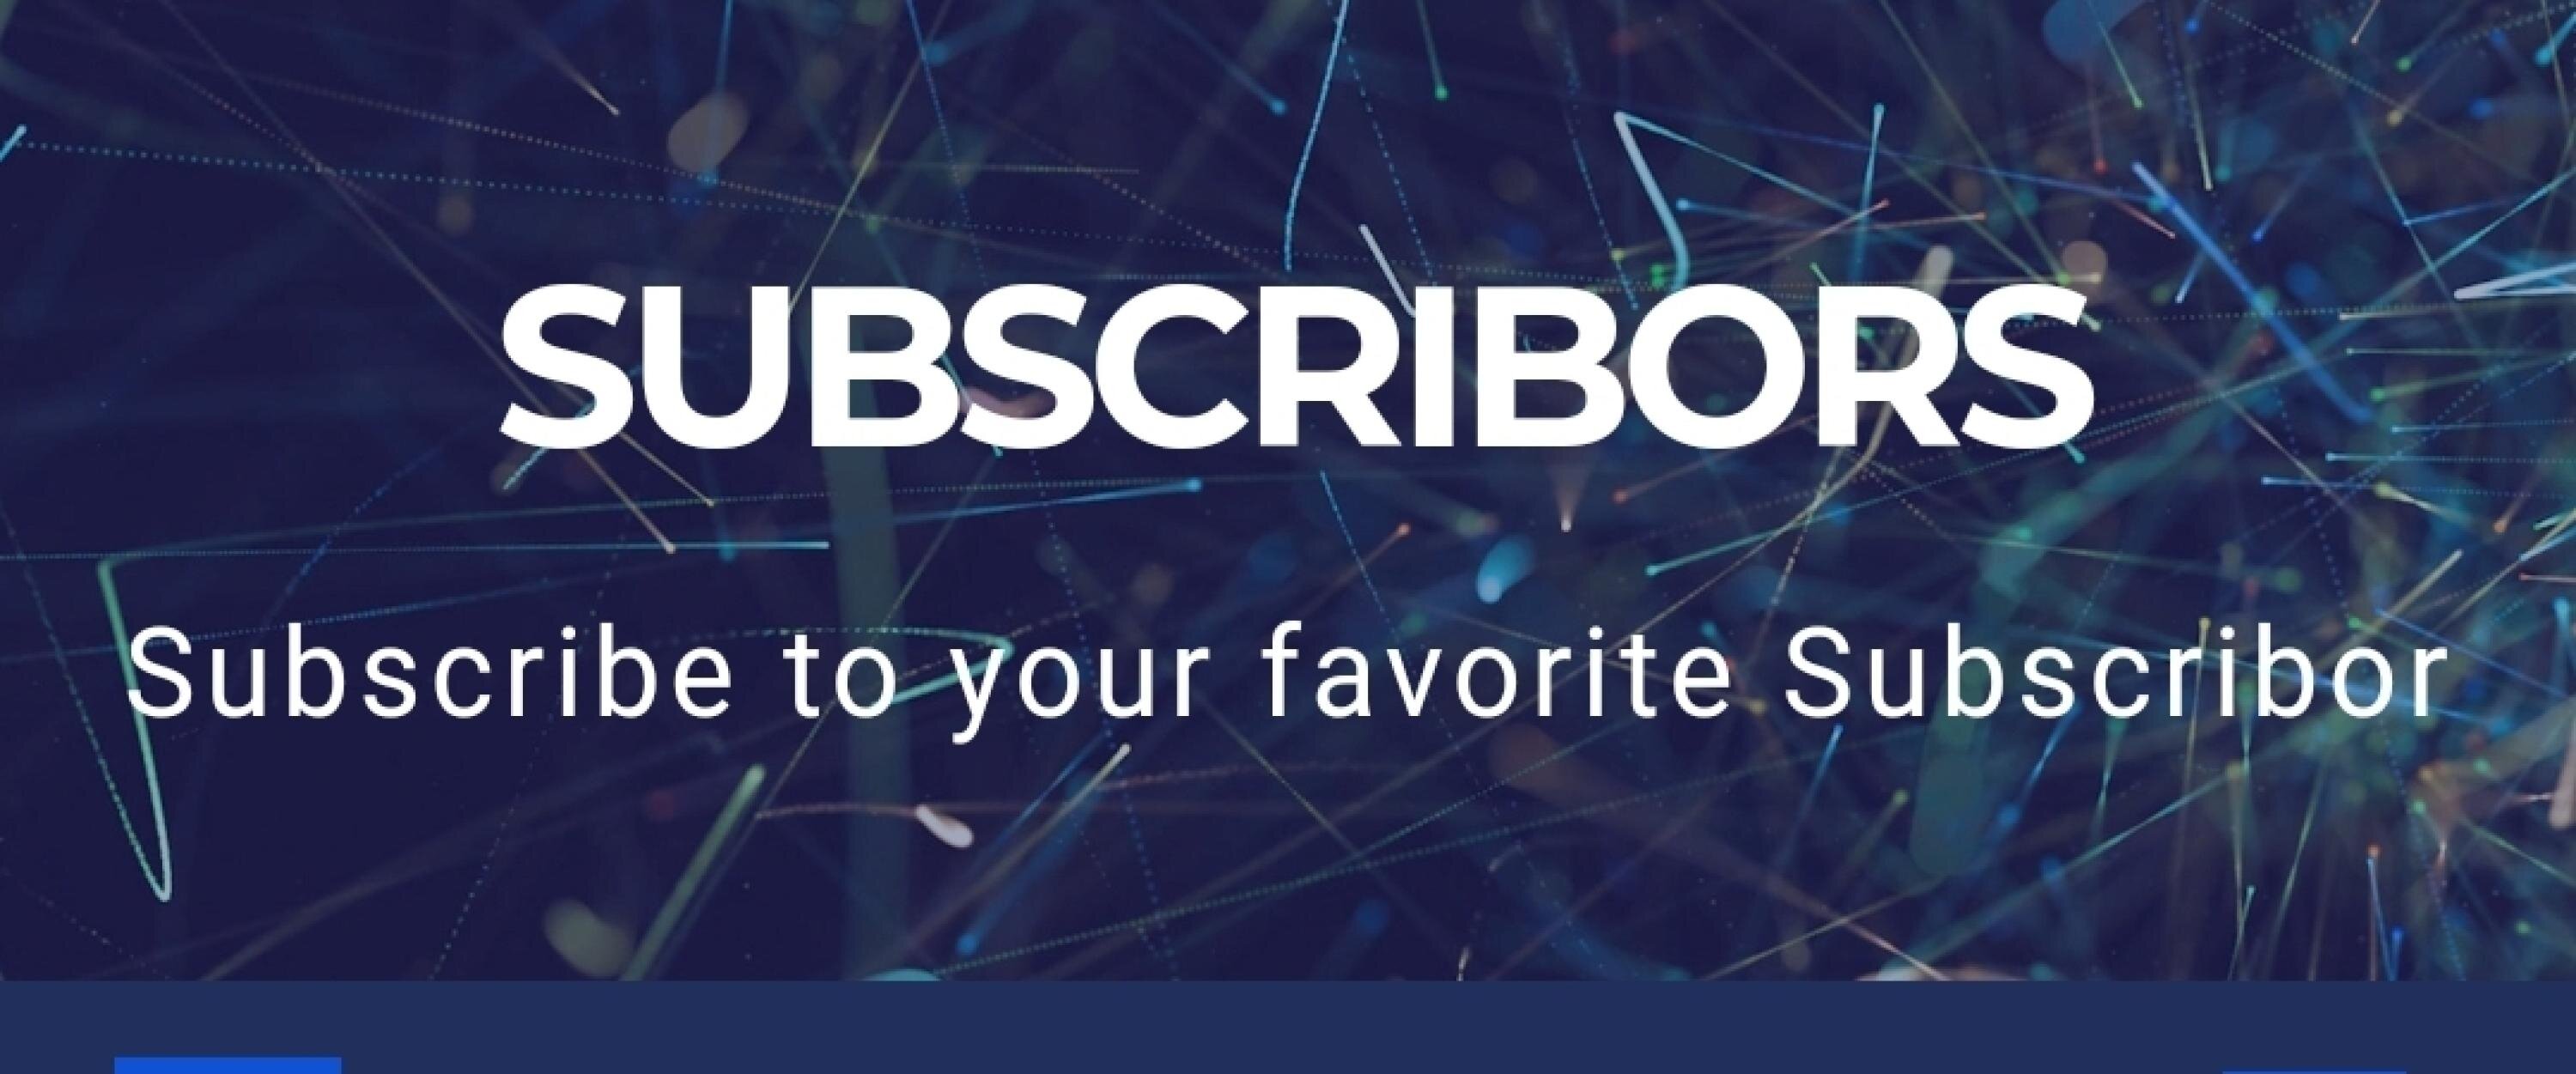 subscribors cover photo